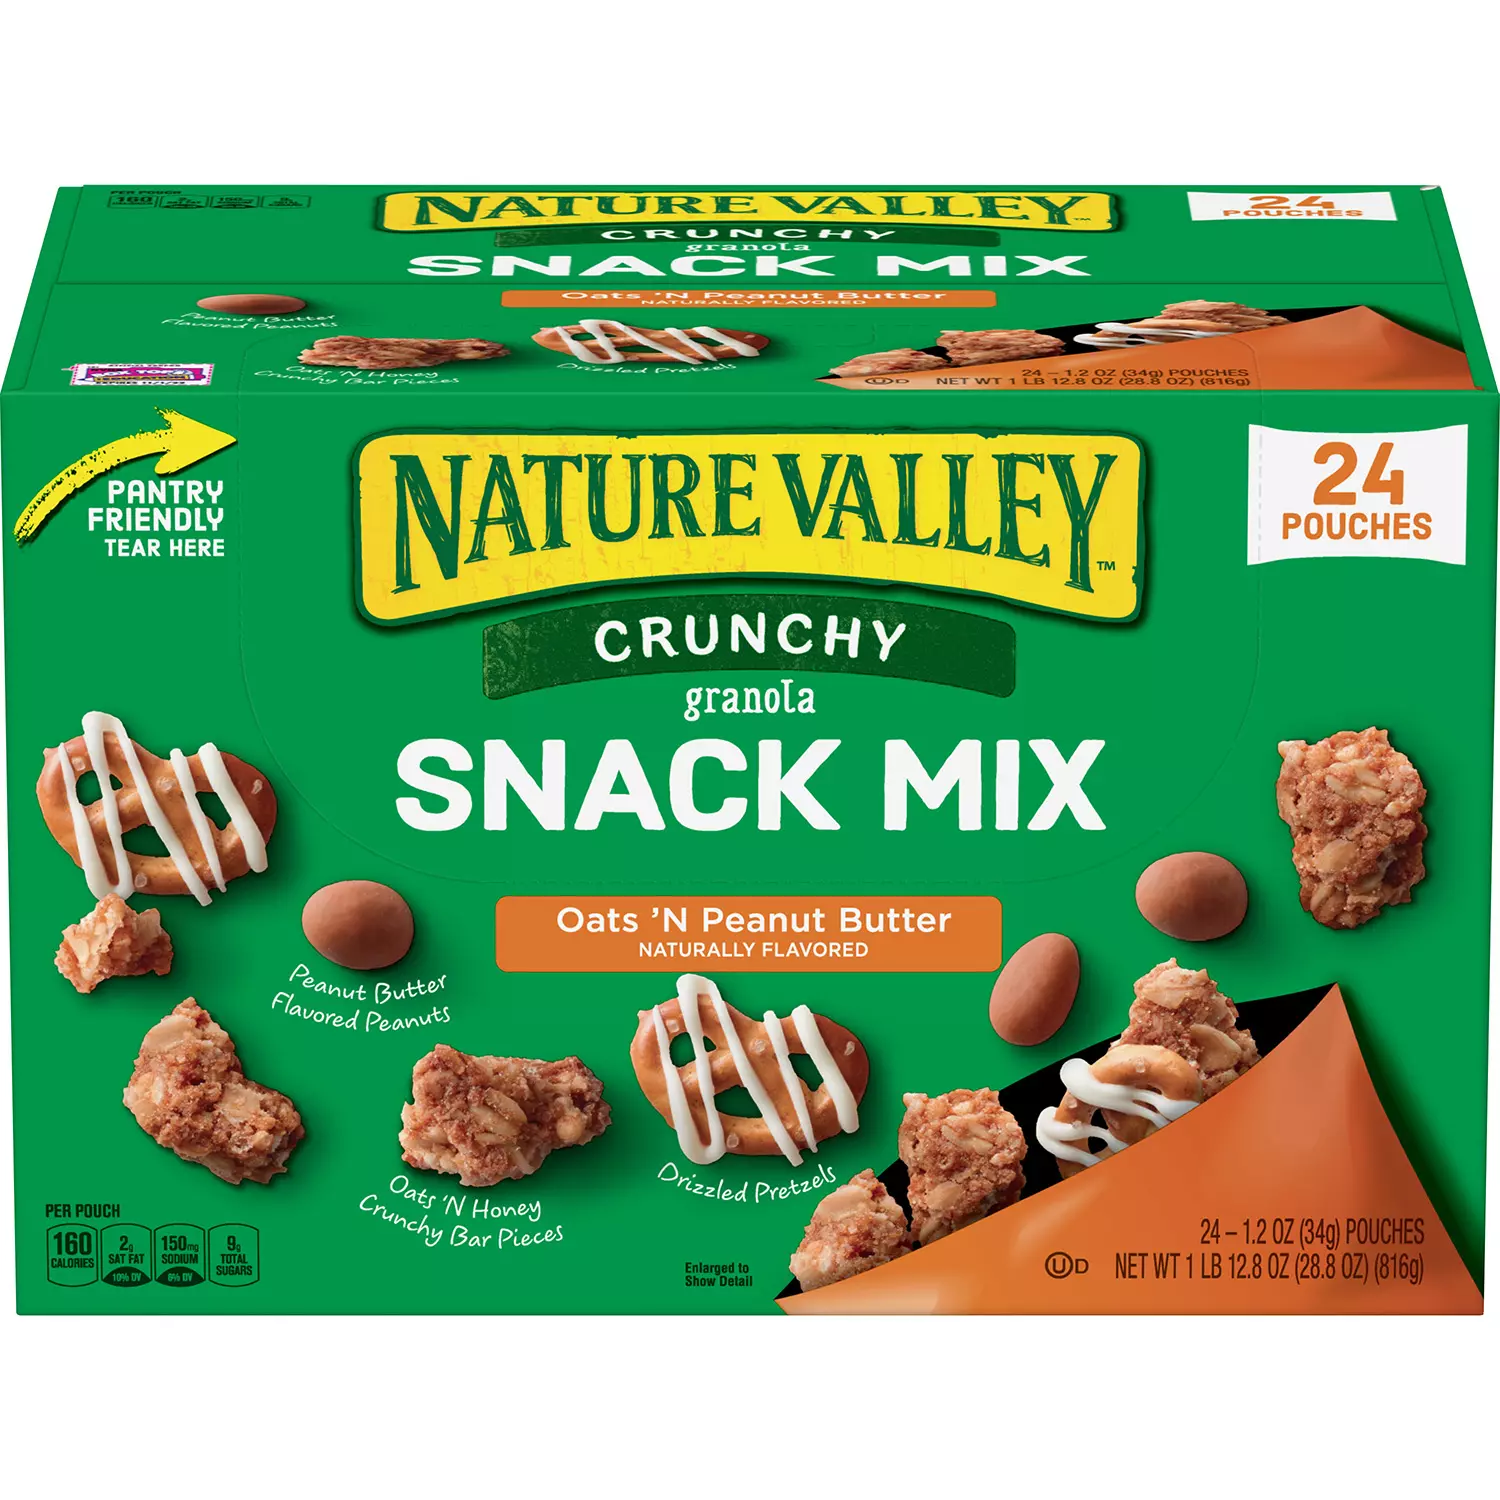 Nature Valley Crunchy Granola Snack Mix Oats 'N Peanut Butter